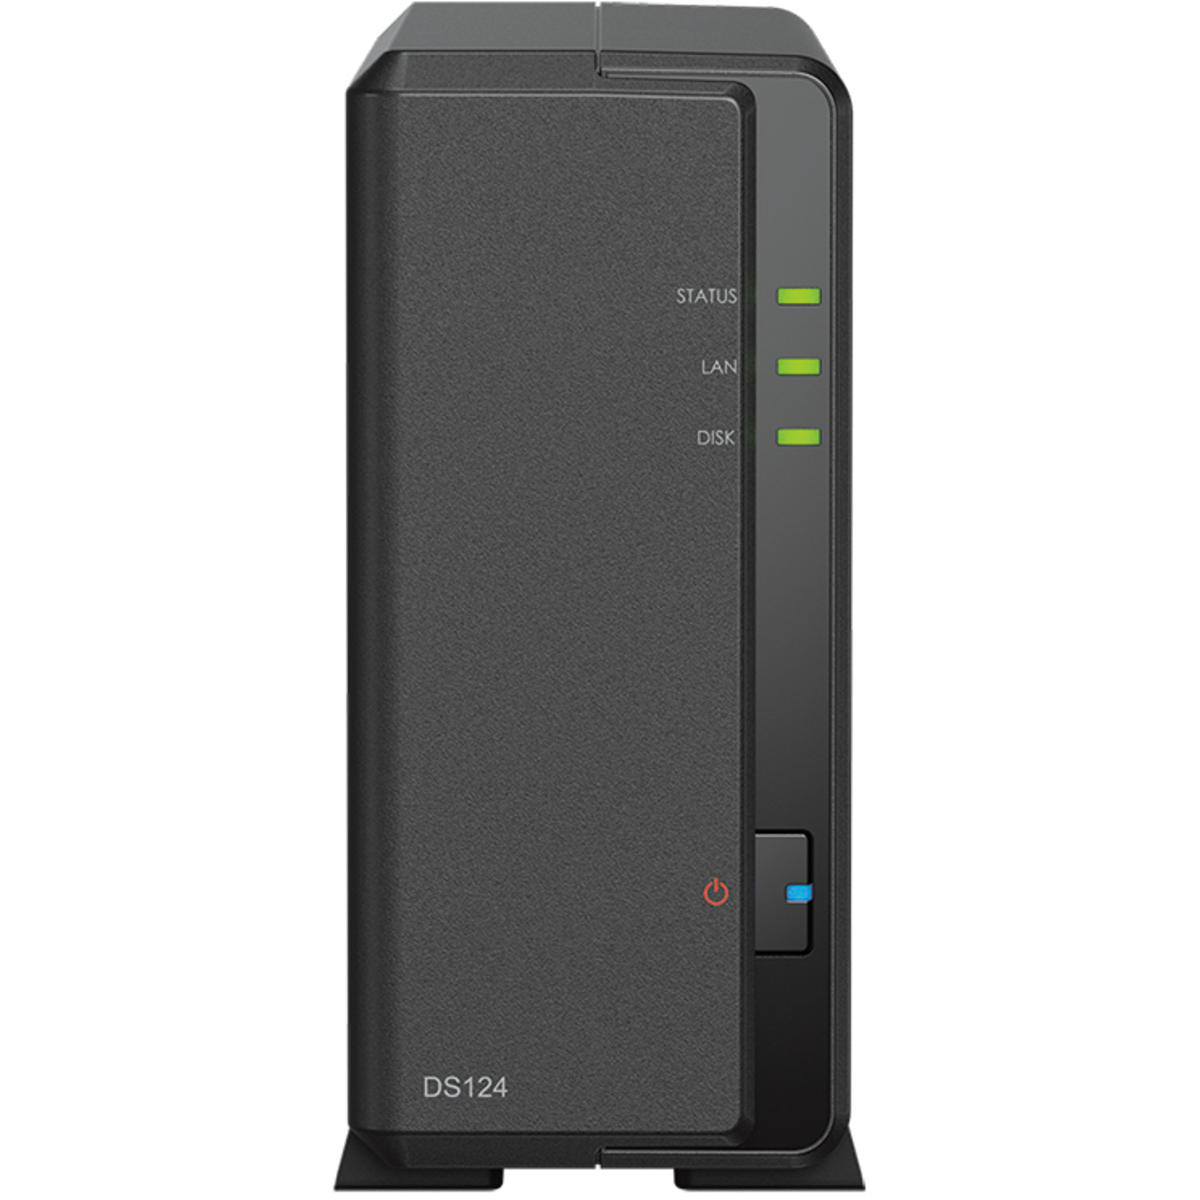 Synology DiskStation DS124 8tb 1-Bay Desktop Personal / Basic Home / Small Office NAS - Network Attached Storage Device 1x8tb Synology HAT5310 Series HAT5310-8T 3.5 7200rpm SATA 6Gb/s HDD ENTERPRISE Class Drives Installed - Burn-In Tested DiskStation DS124